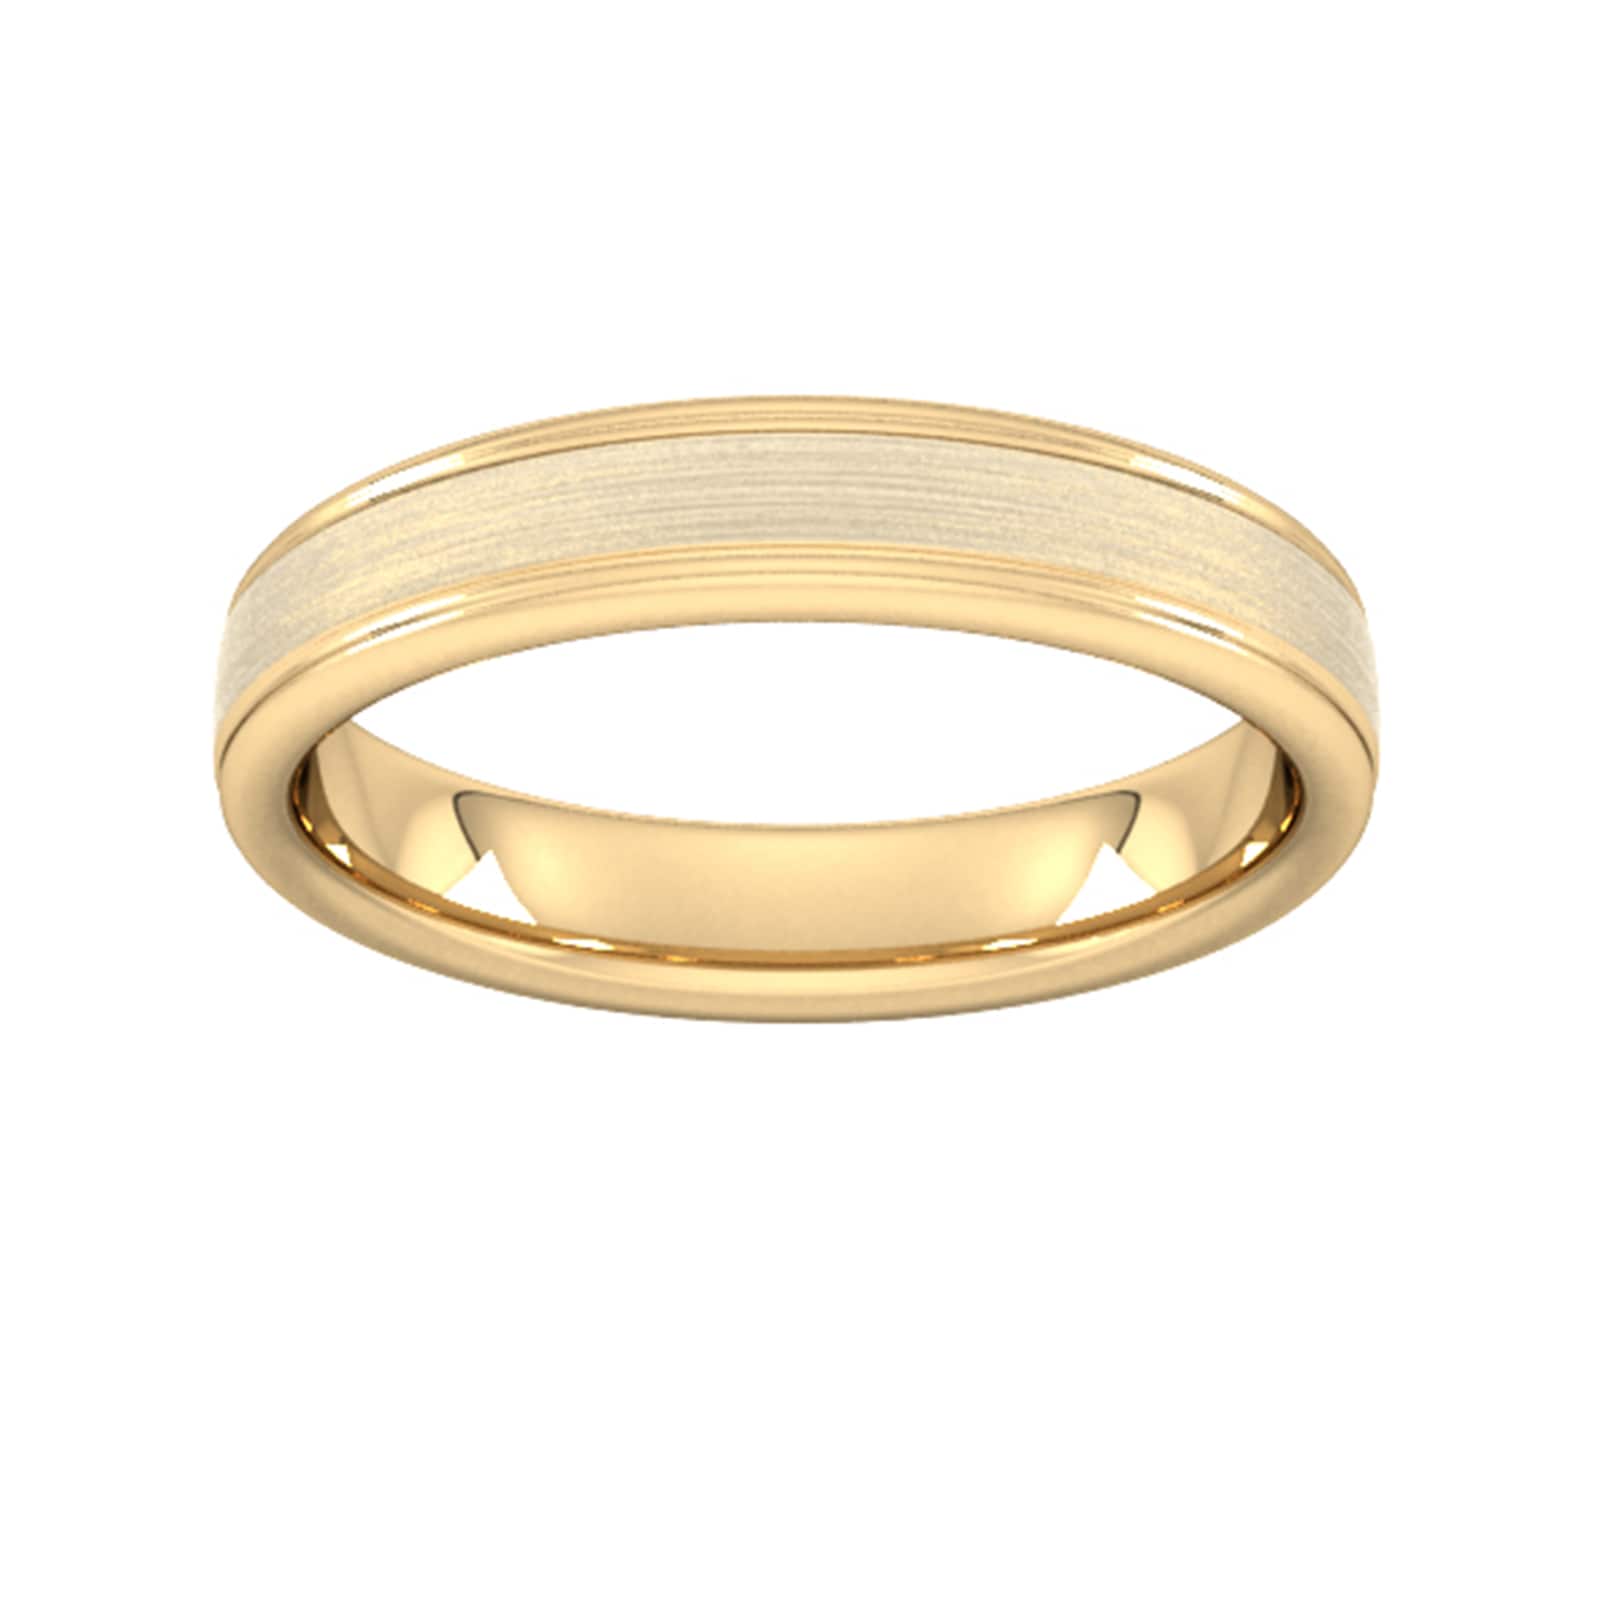 4mm Slight Court Standard Matt Centre With Grooves Wedding Ring In 9 Carat Yellow Gold - Ring Size L